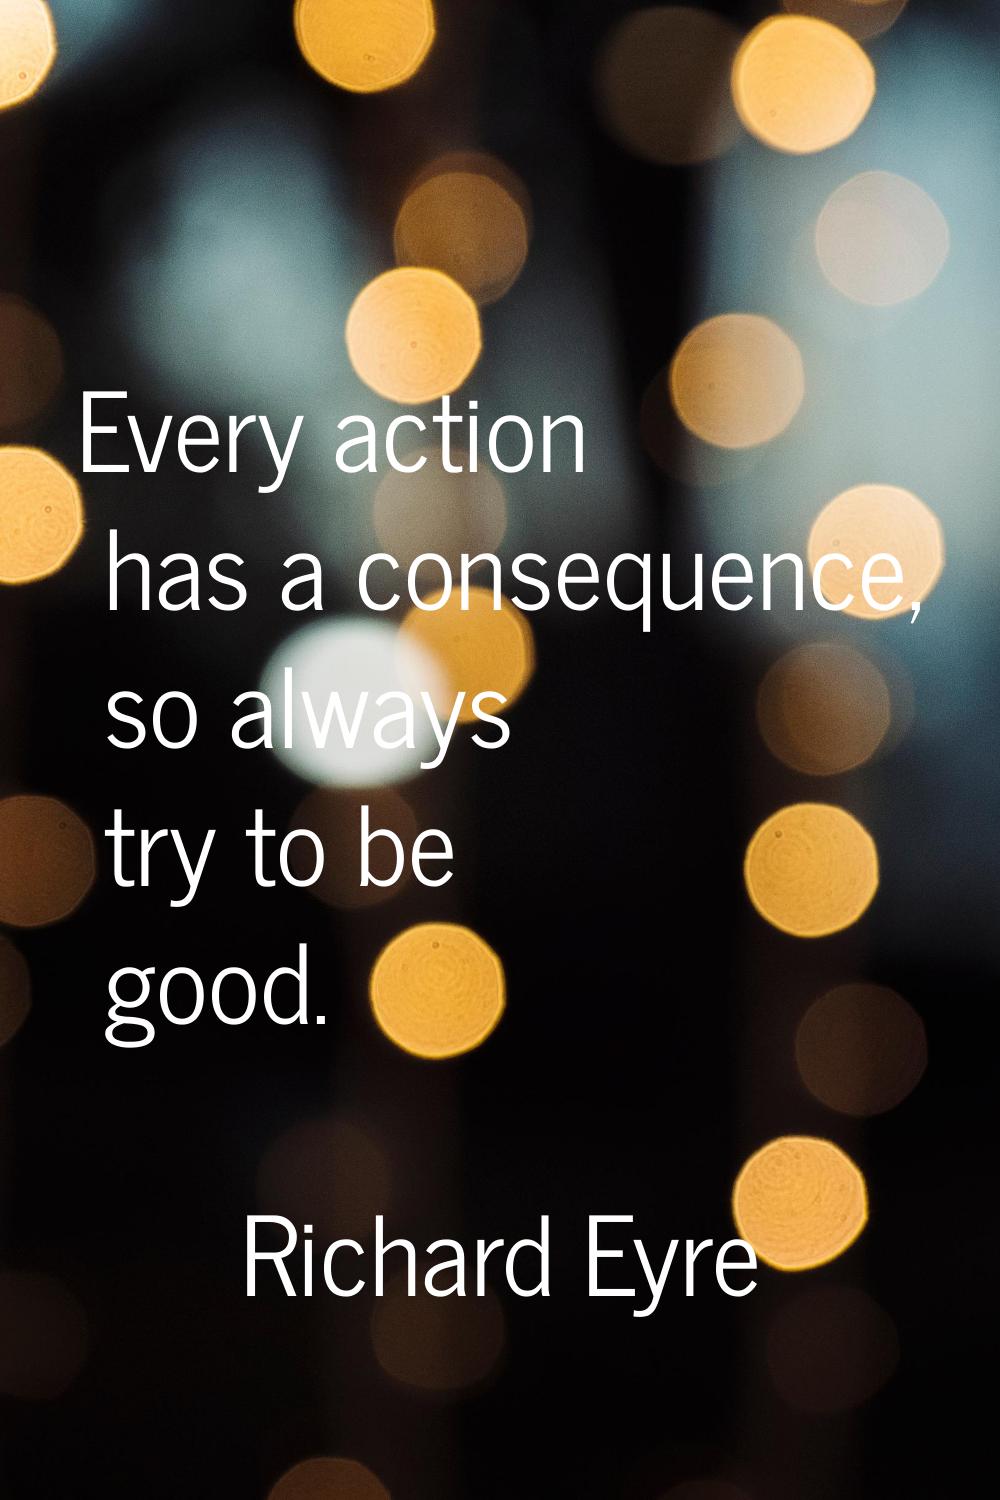 Every action has a consequence, so always try to be good.